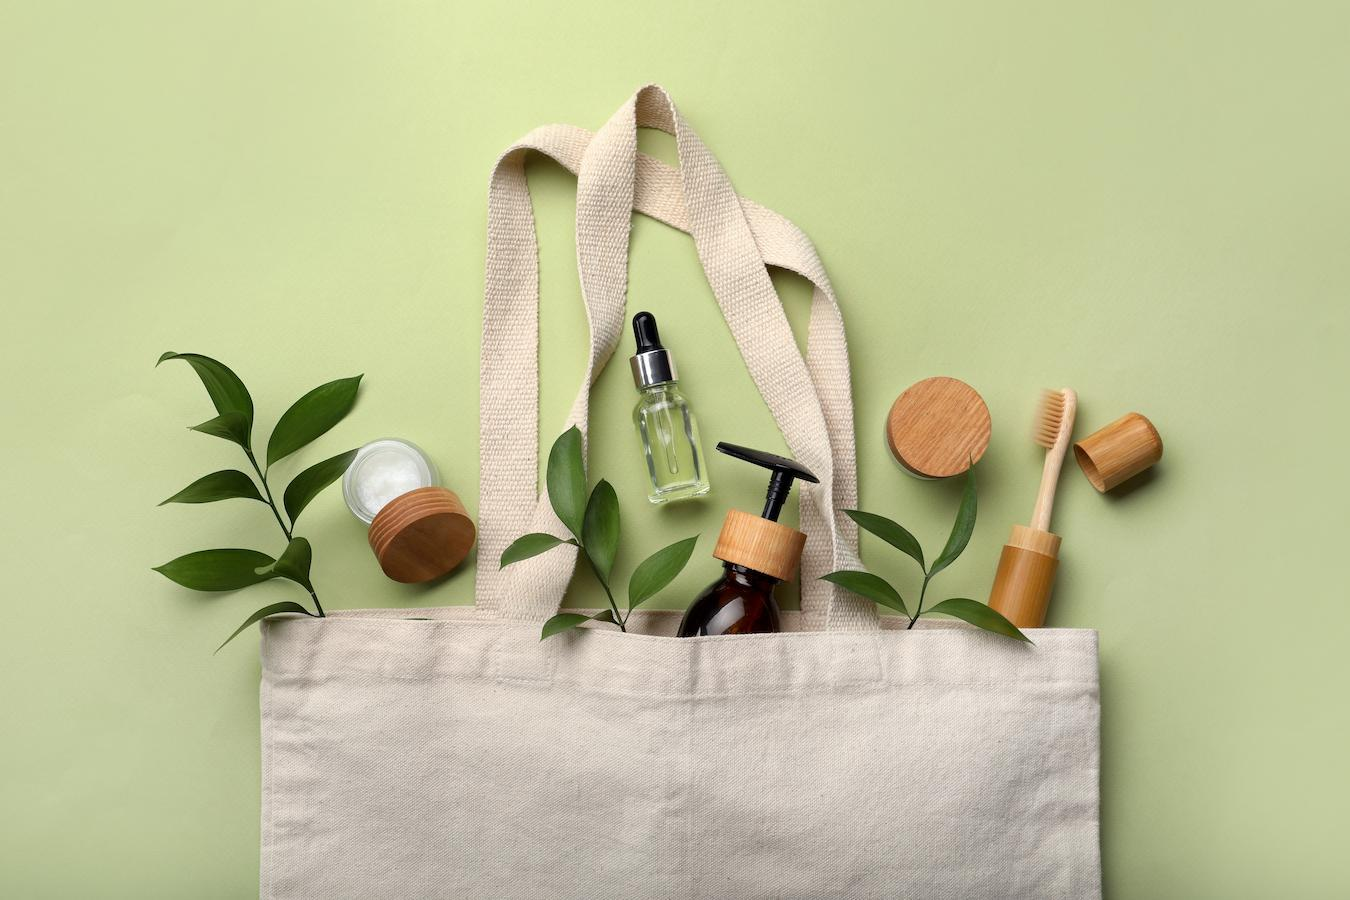 a tote bag of natural beauty products travel beauty travel sizes worry long day night lipstick red eyes moisturizer sun hair sleep packing space lipstick flight space carry travel beauty